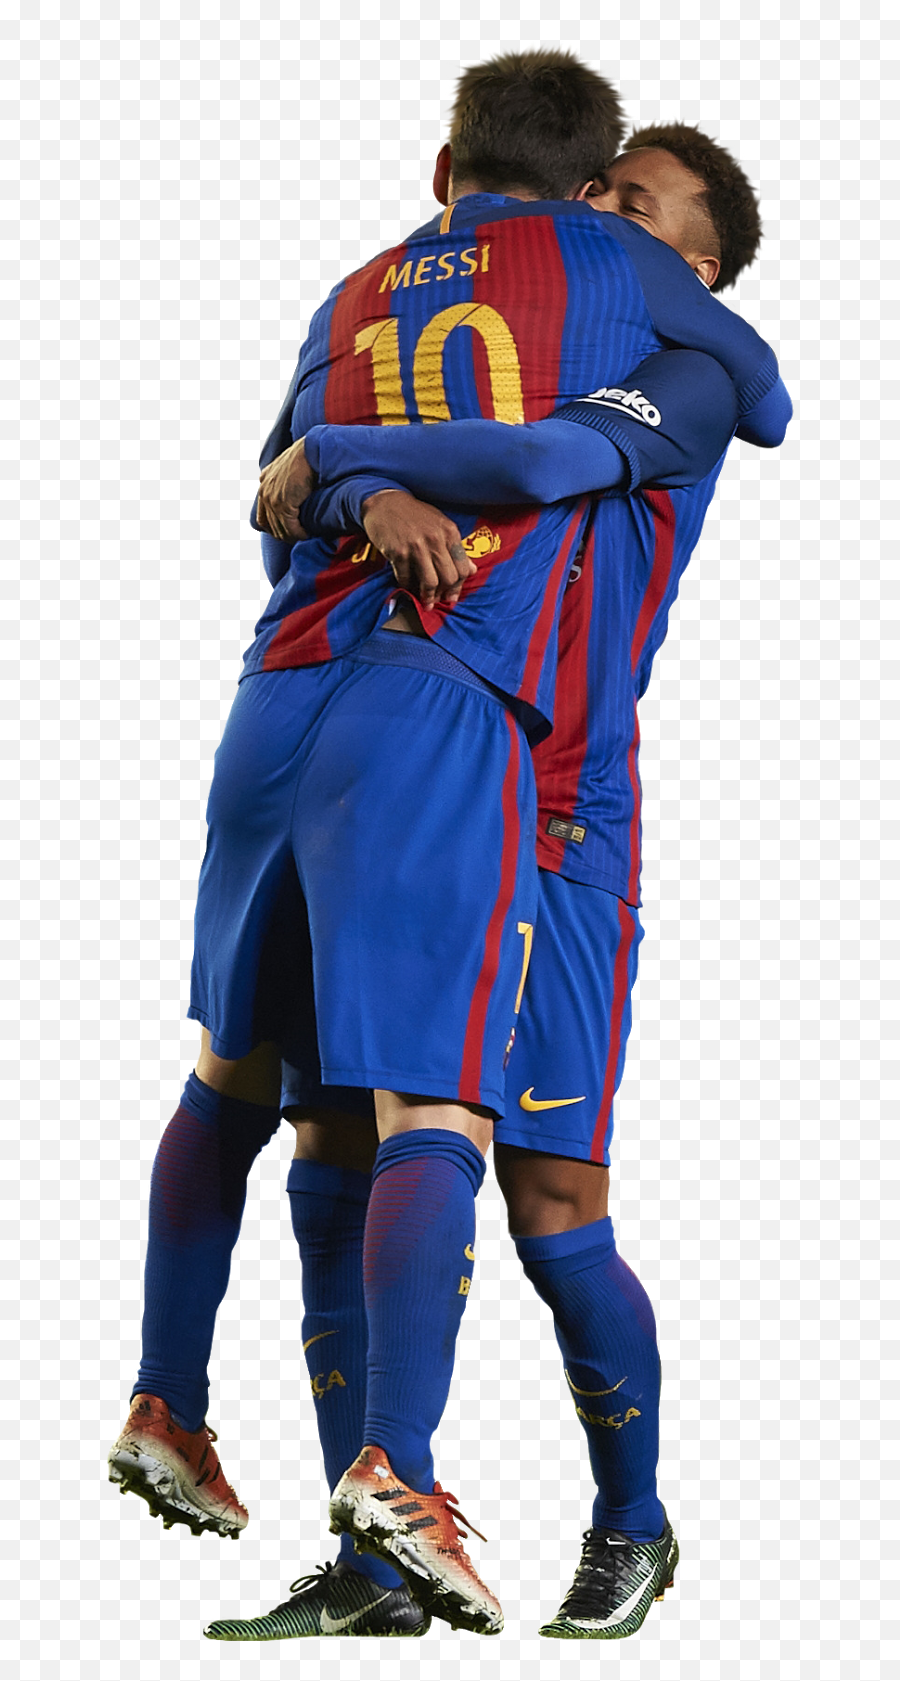 Download Messi - Messi Y Neymar Png Full Size Png Image Messi Y Neymar Png,Neymar Png